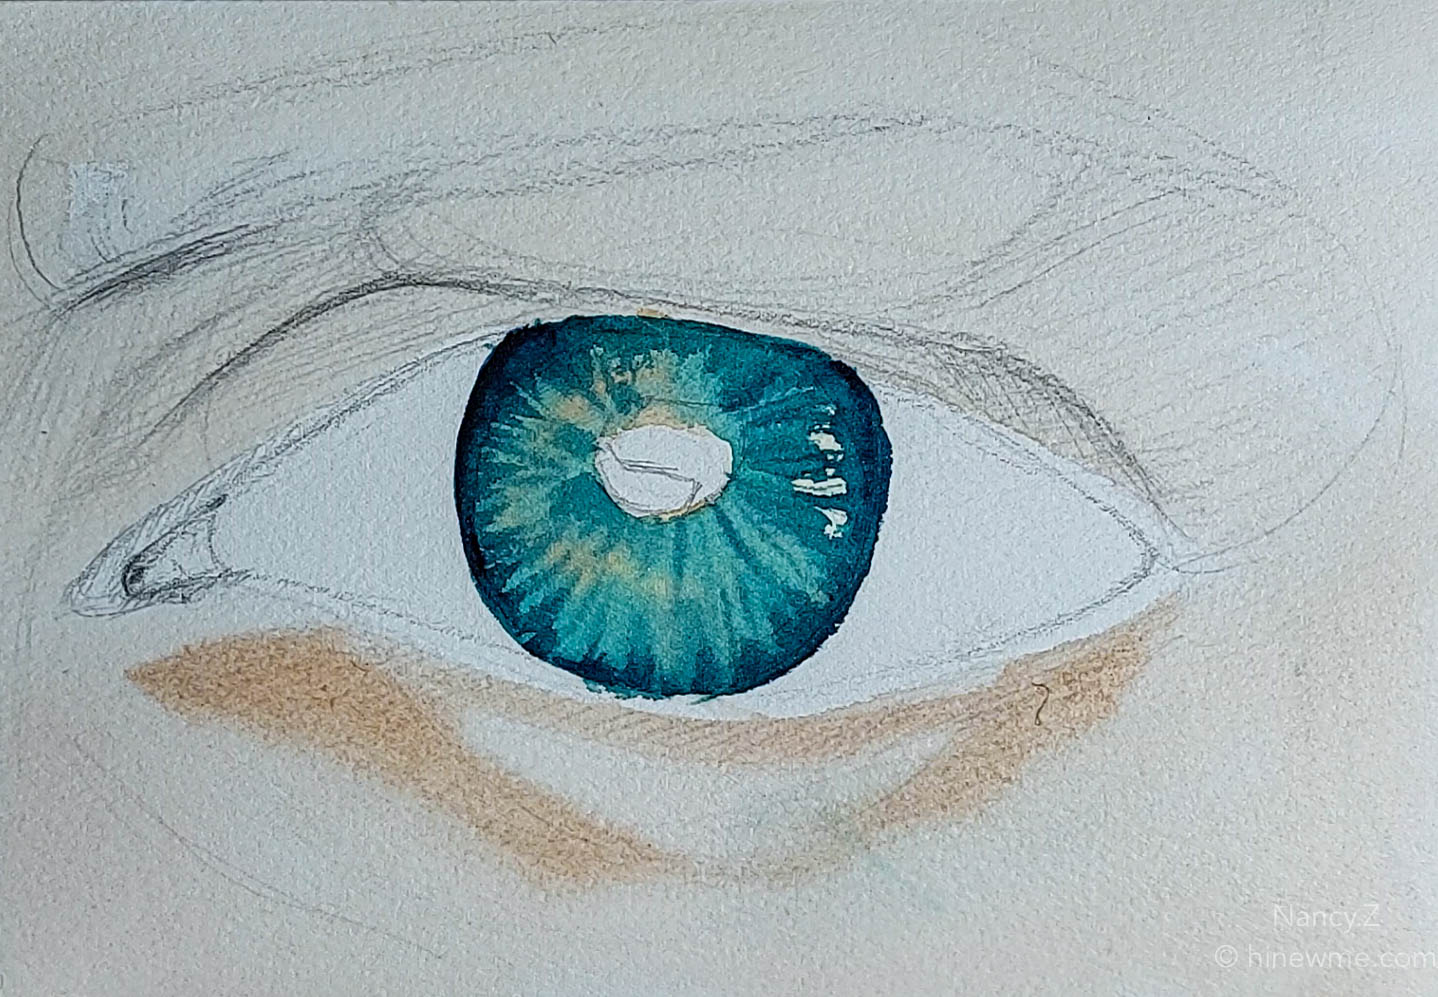 How to draw an eye with blue pupil step by step for beginners,